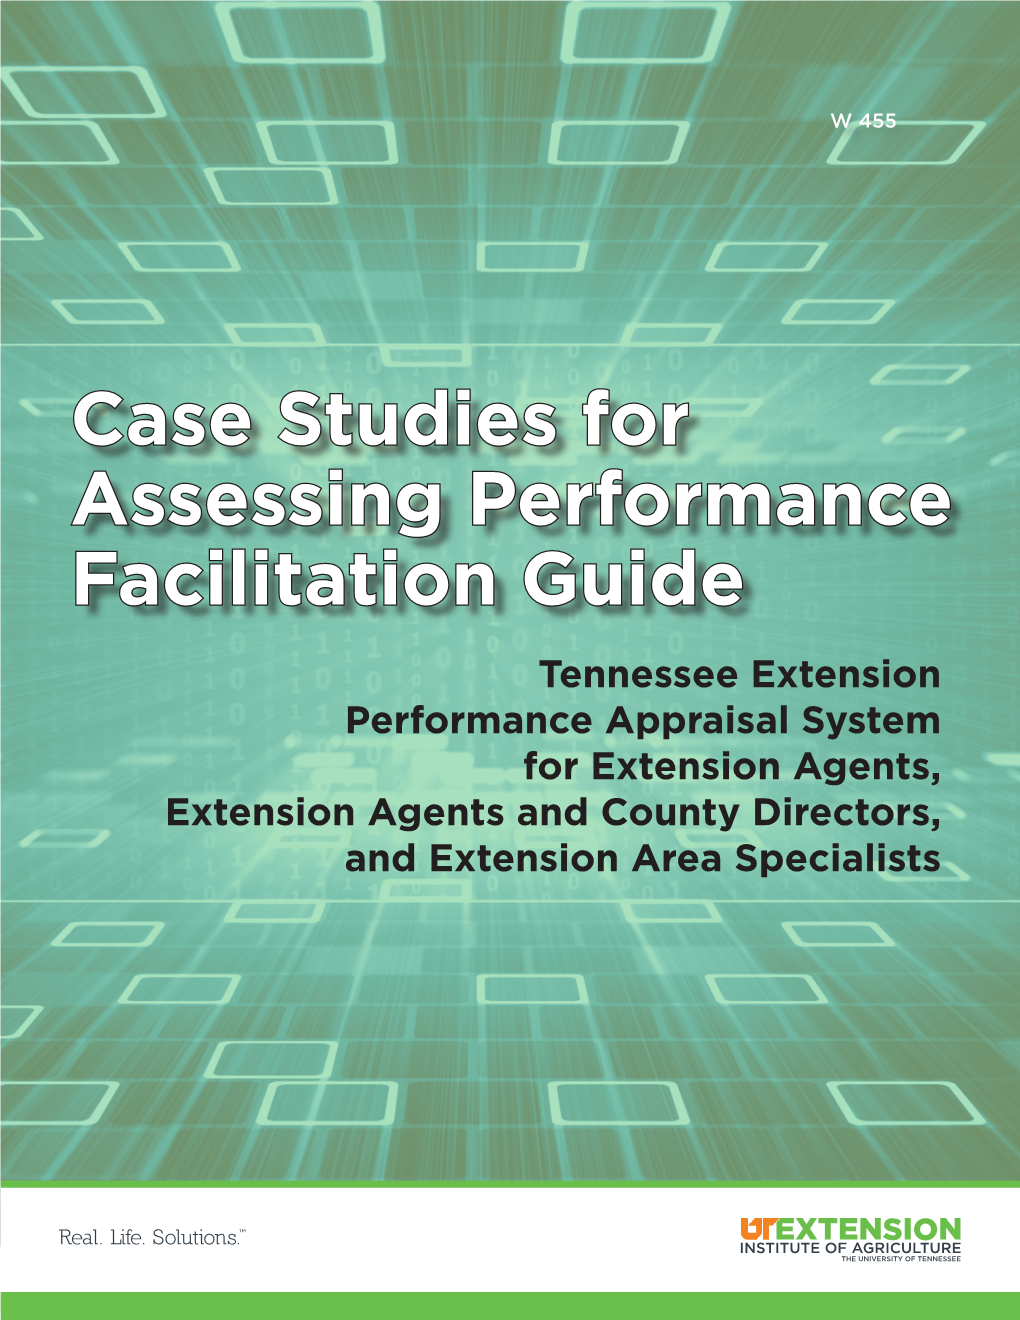 Case Studies for Assessing Performance Facilitation Guide